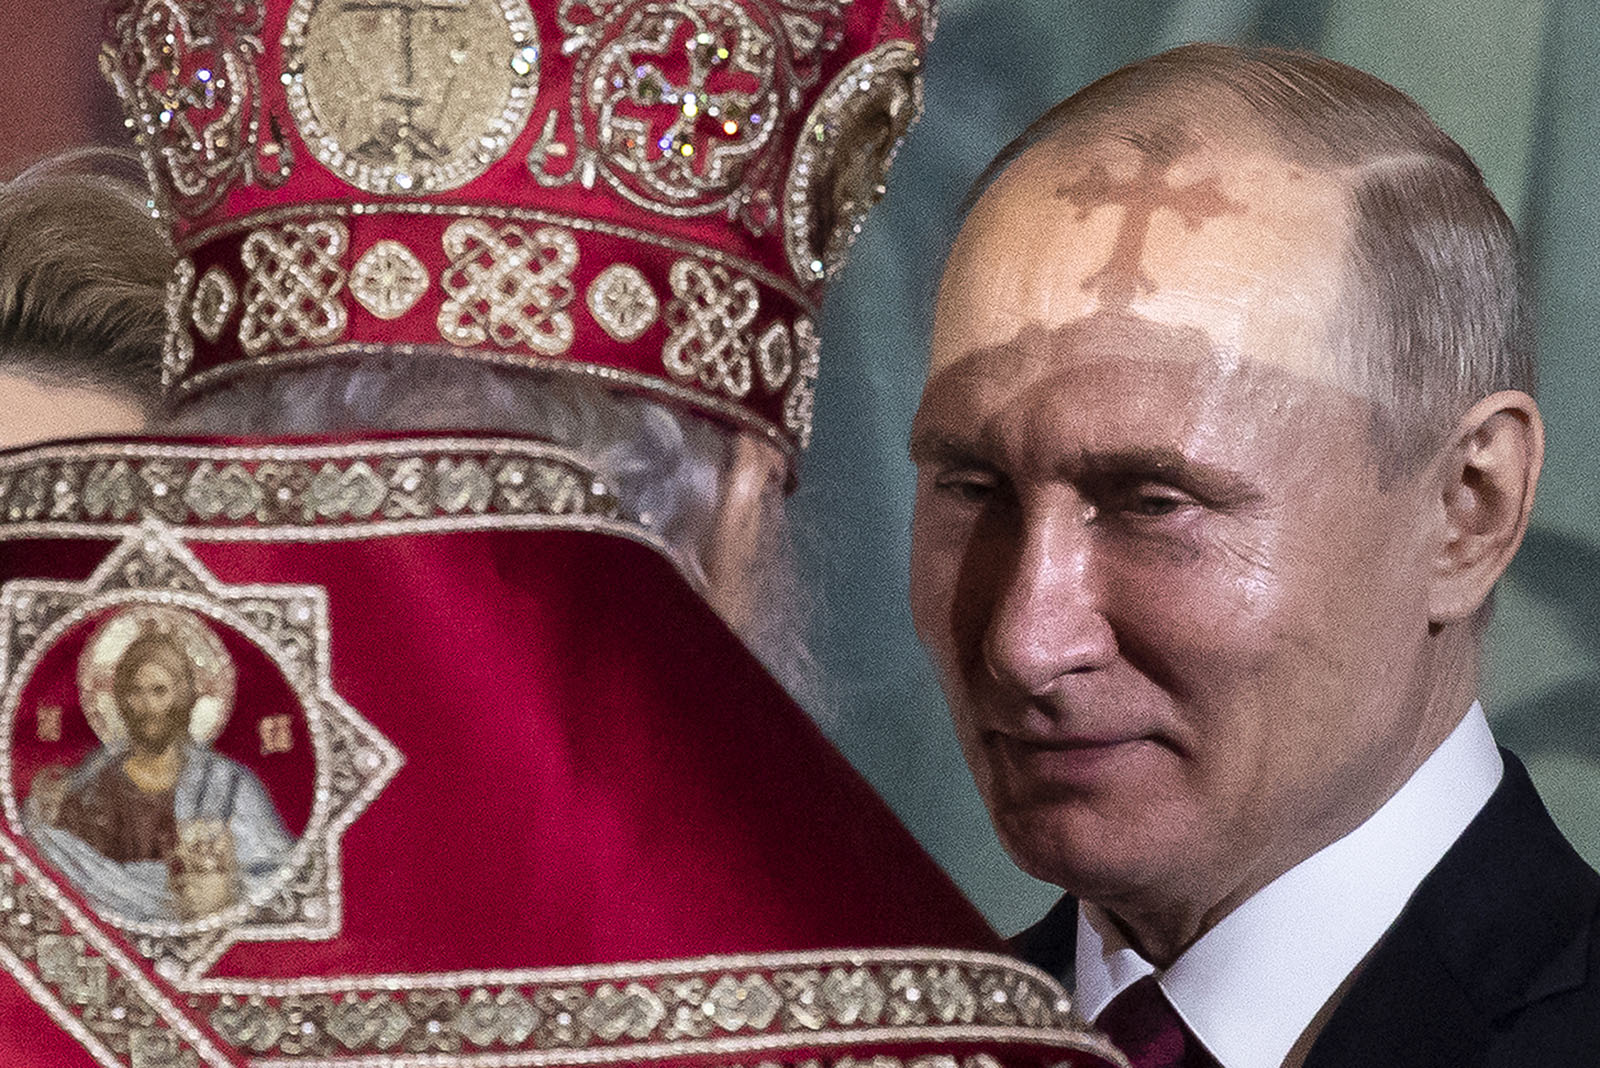 Russian Orthodox Patriarch Kirill, left, talks to President Vladimir Putin, right, during the Easter service in the Christ the Savior Cathedral in Moscow, Russia, Sunday, April 28, 2019. (AP Photo/Alexander Zemlianichenko)